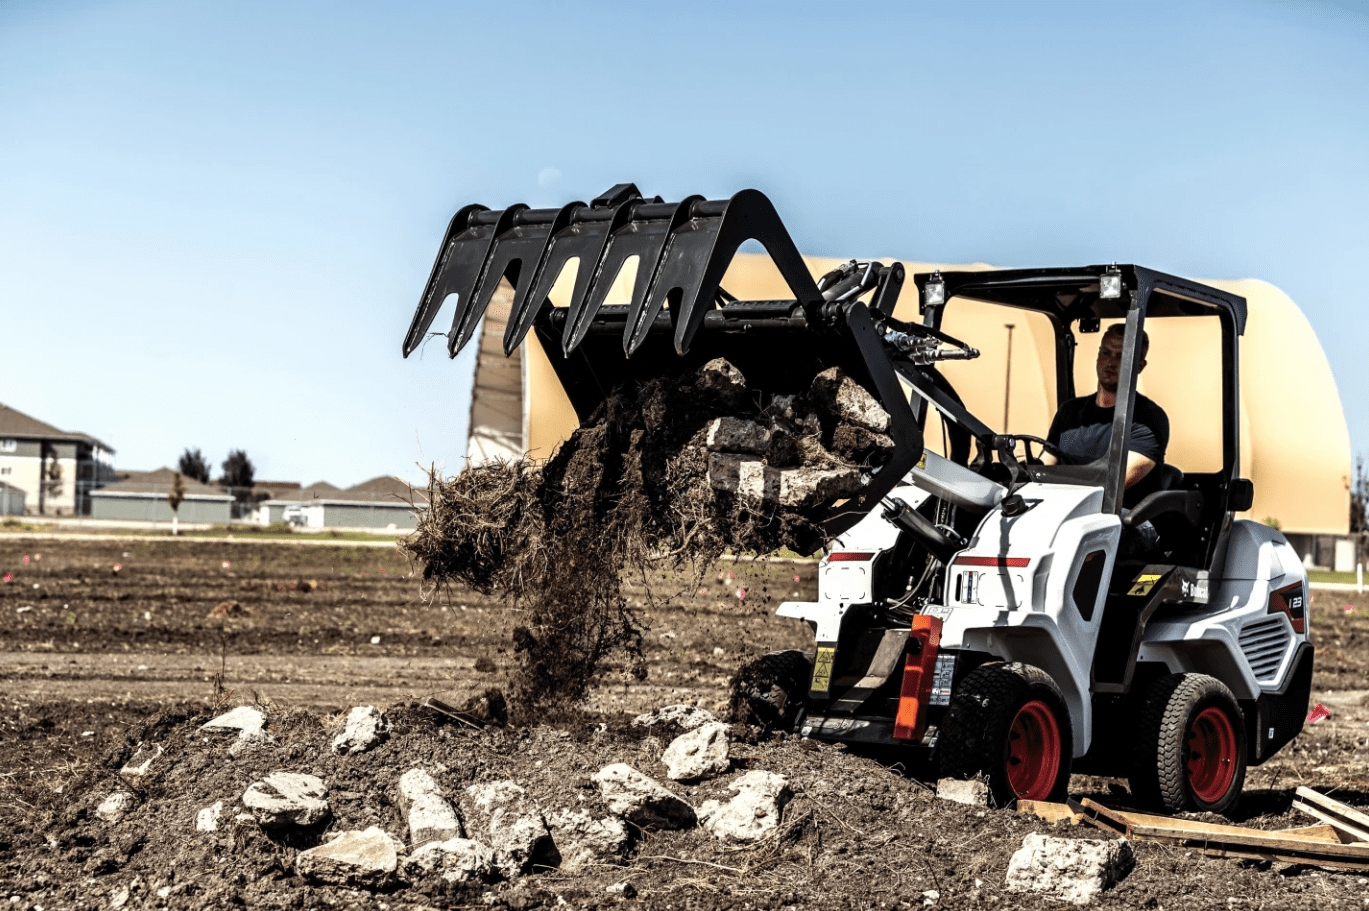 Browse Specs and more for the L23 Small Articulated Loader - Bobcat of North Texas